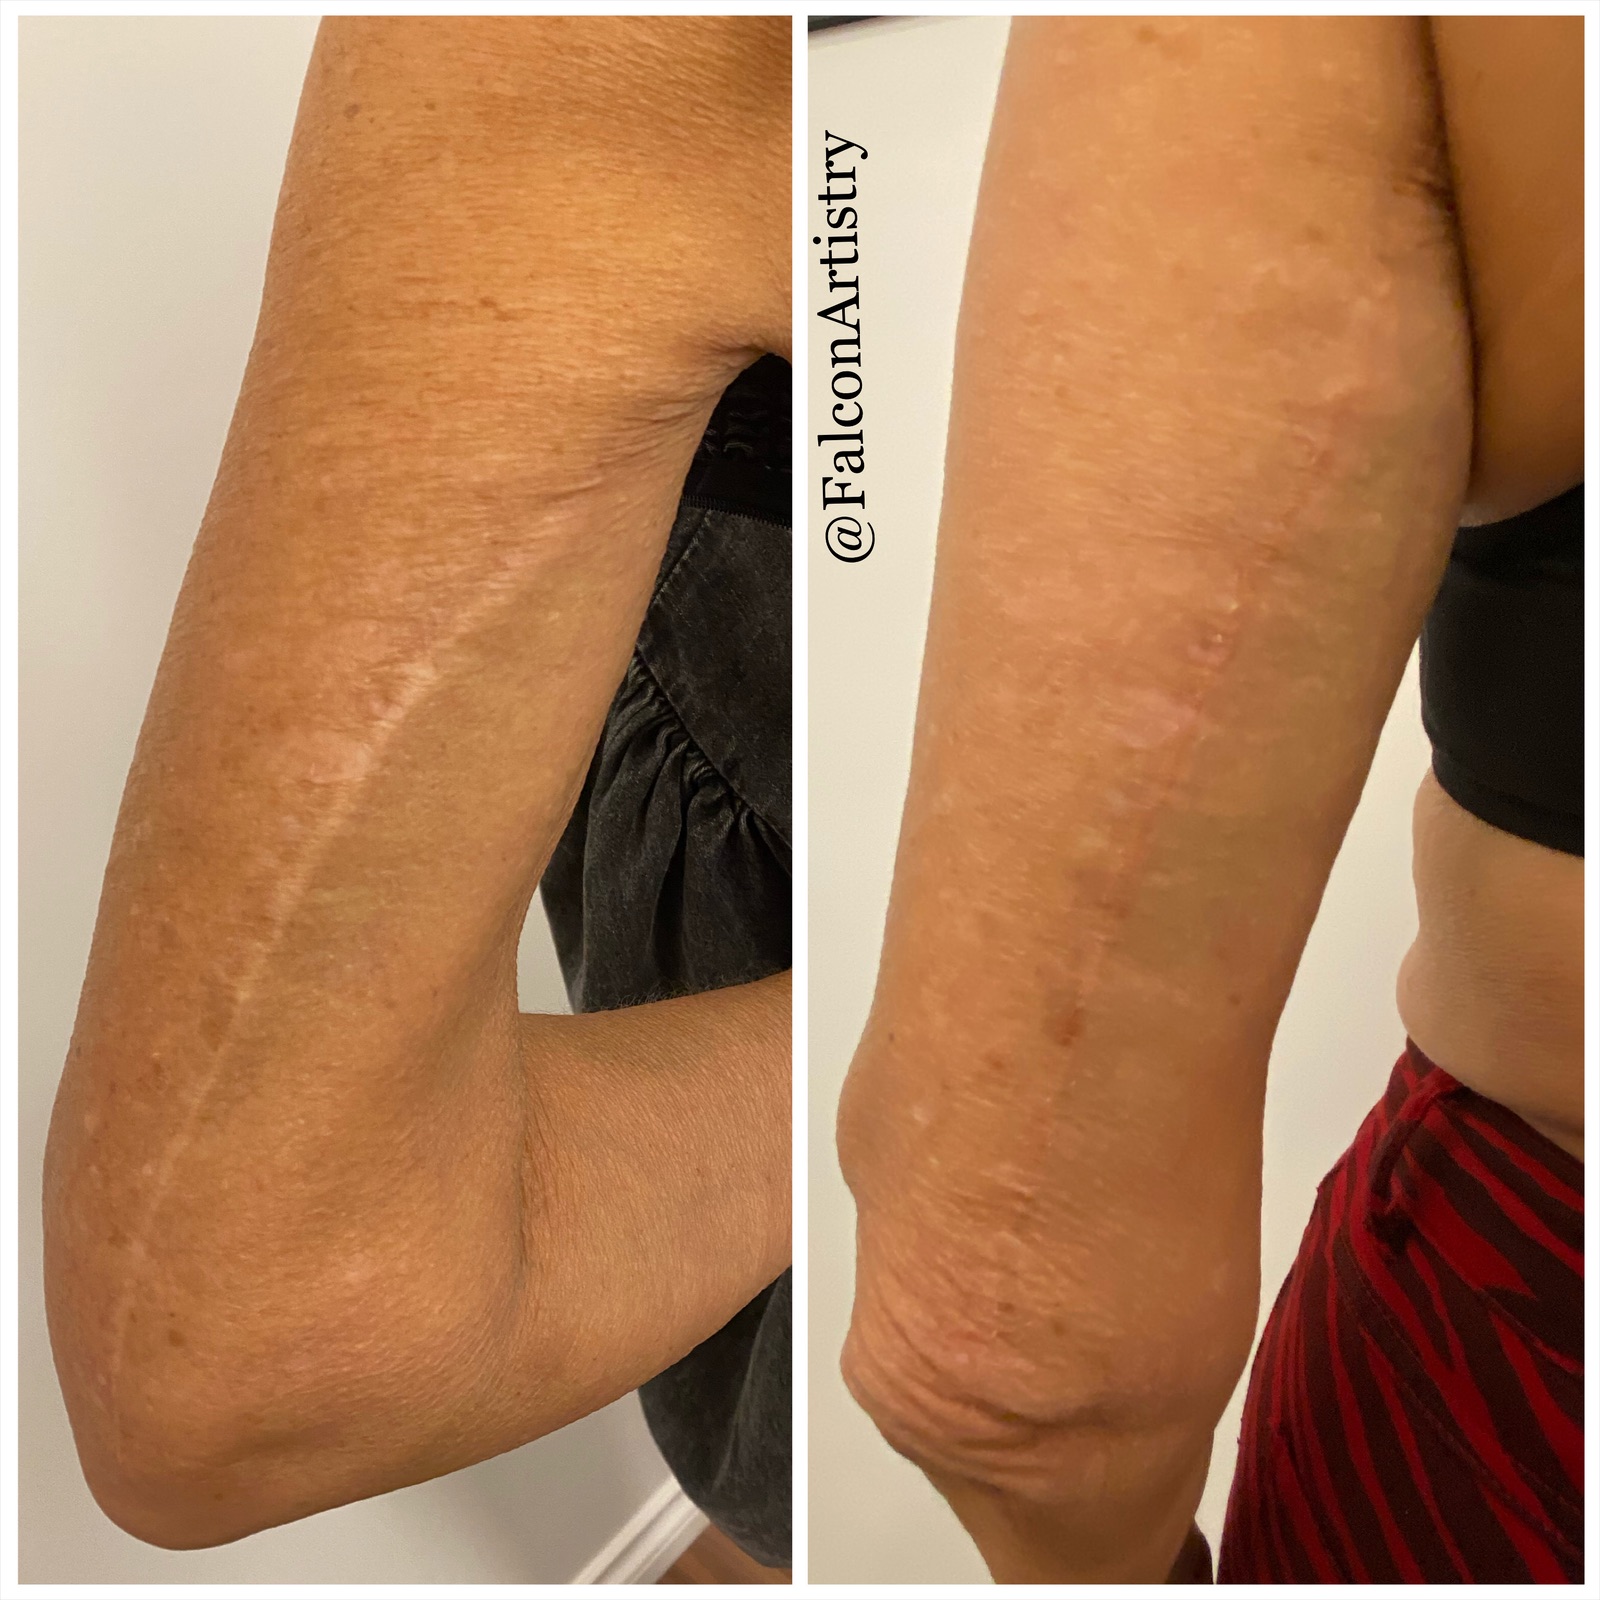 Pink Ink Tattoo - Scar camouflage tattooing- A scar is a mark left on the  skin after trauma. When your skin is injured, your body produces collagen  to reconnect the broken tissues,